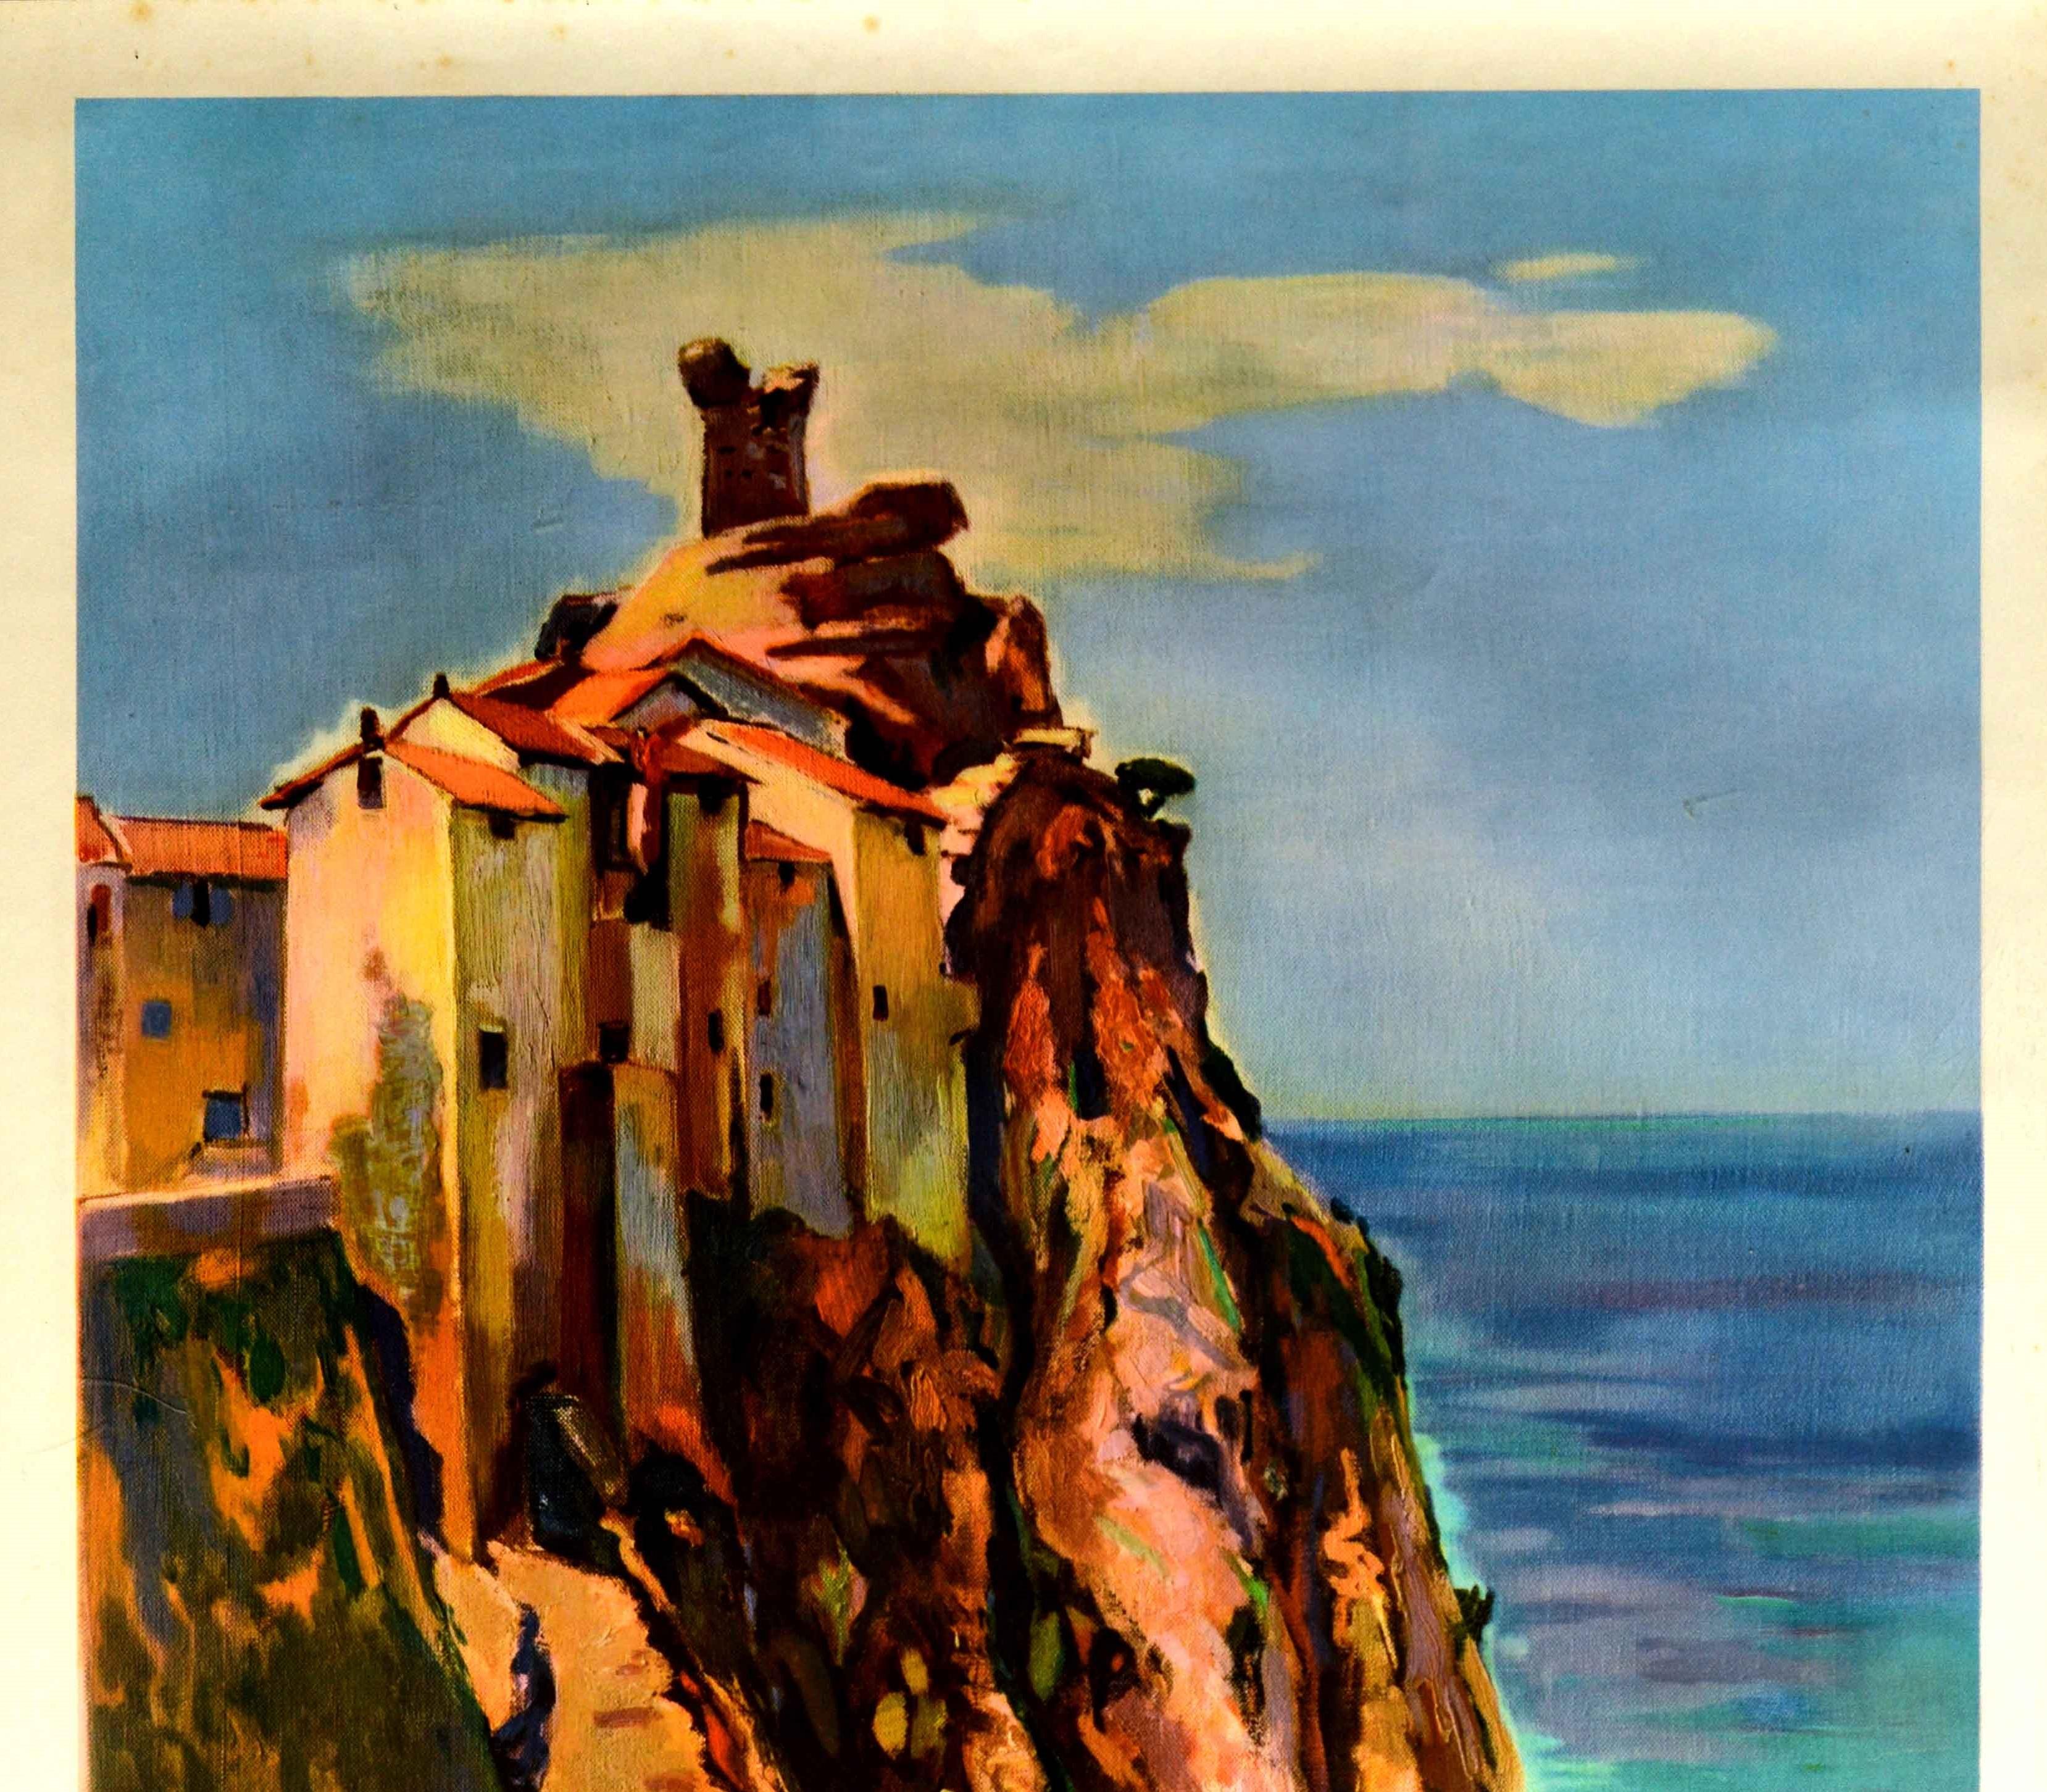 Original vintage travel poster for the Mediterranean island of Corsica in France issued by French Railways featuring a colourful image of a lady walking on a stone path in front of buildings built on the rocky cliff over the Mediterranean Sea with